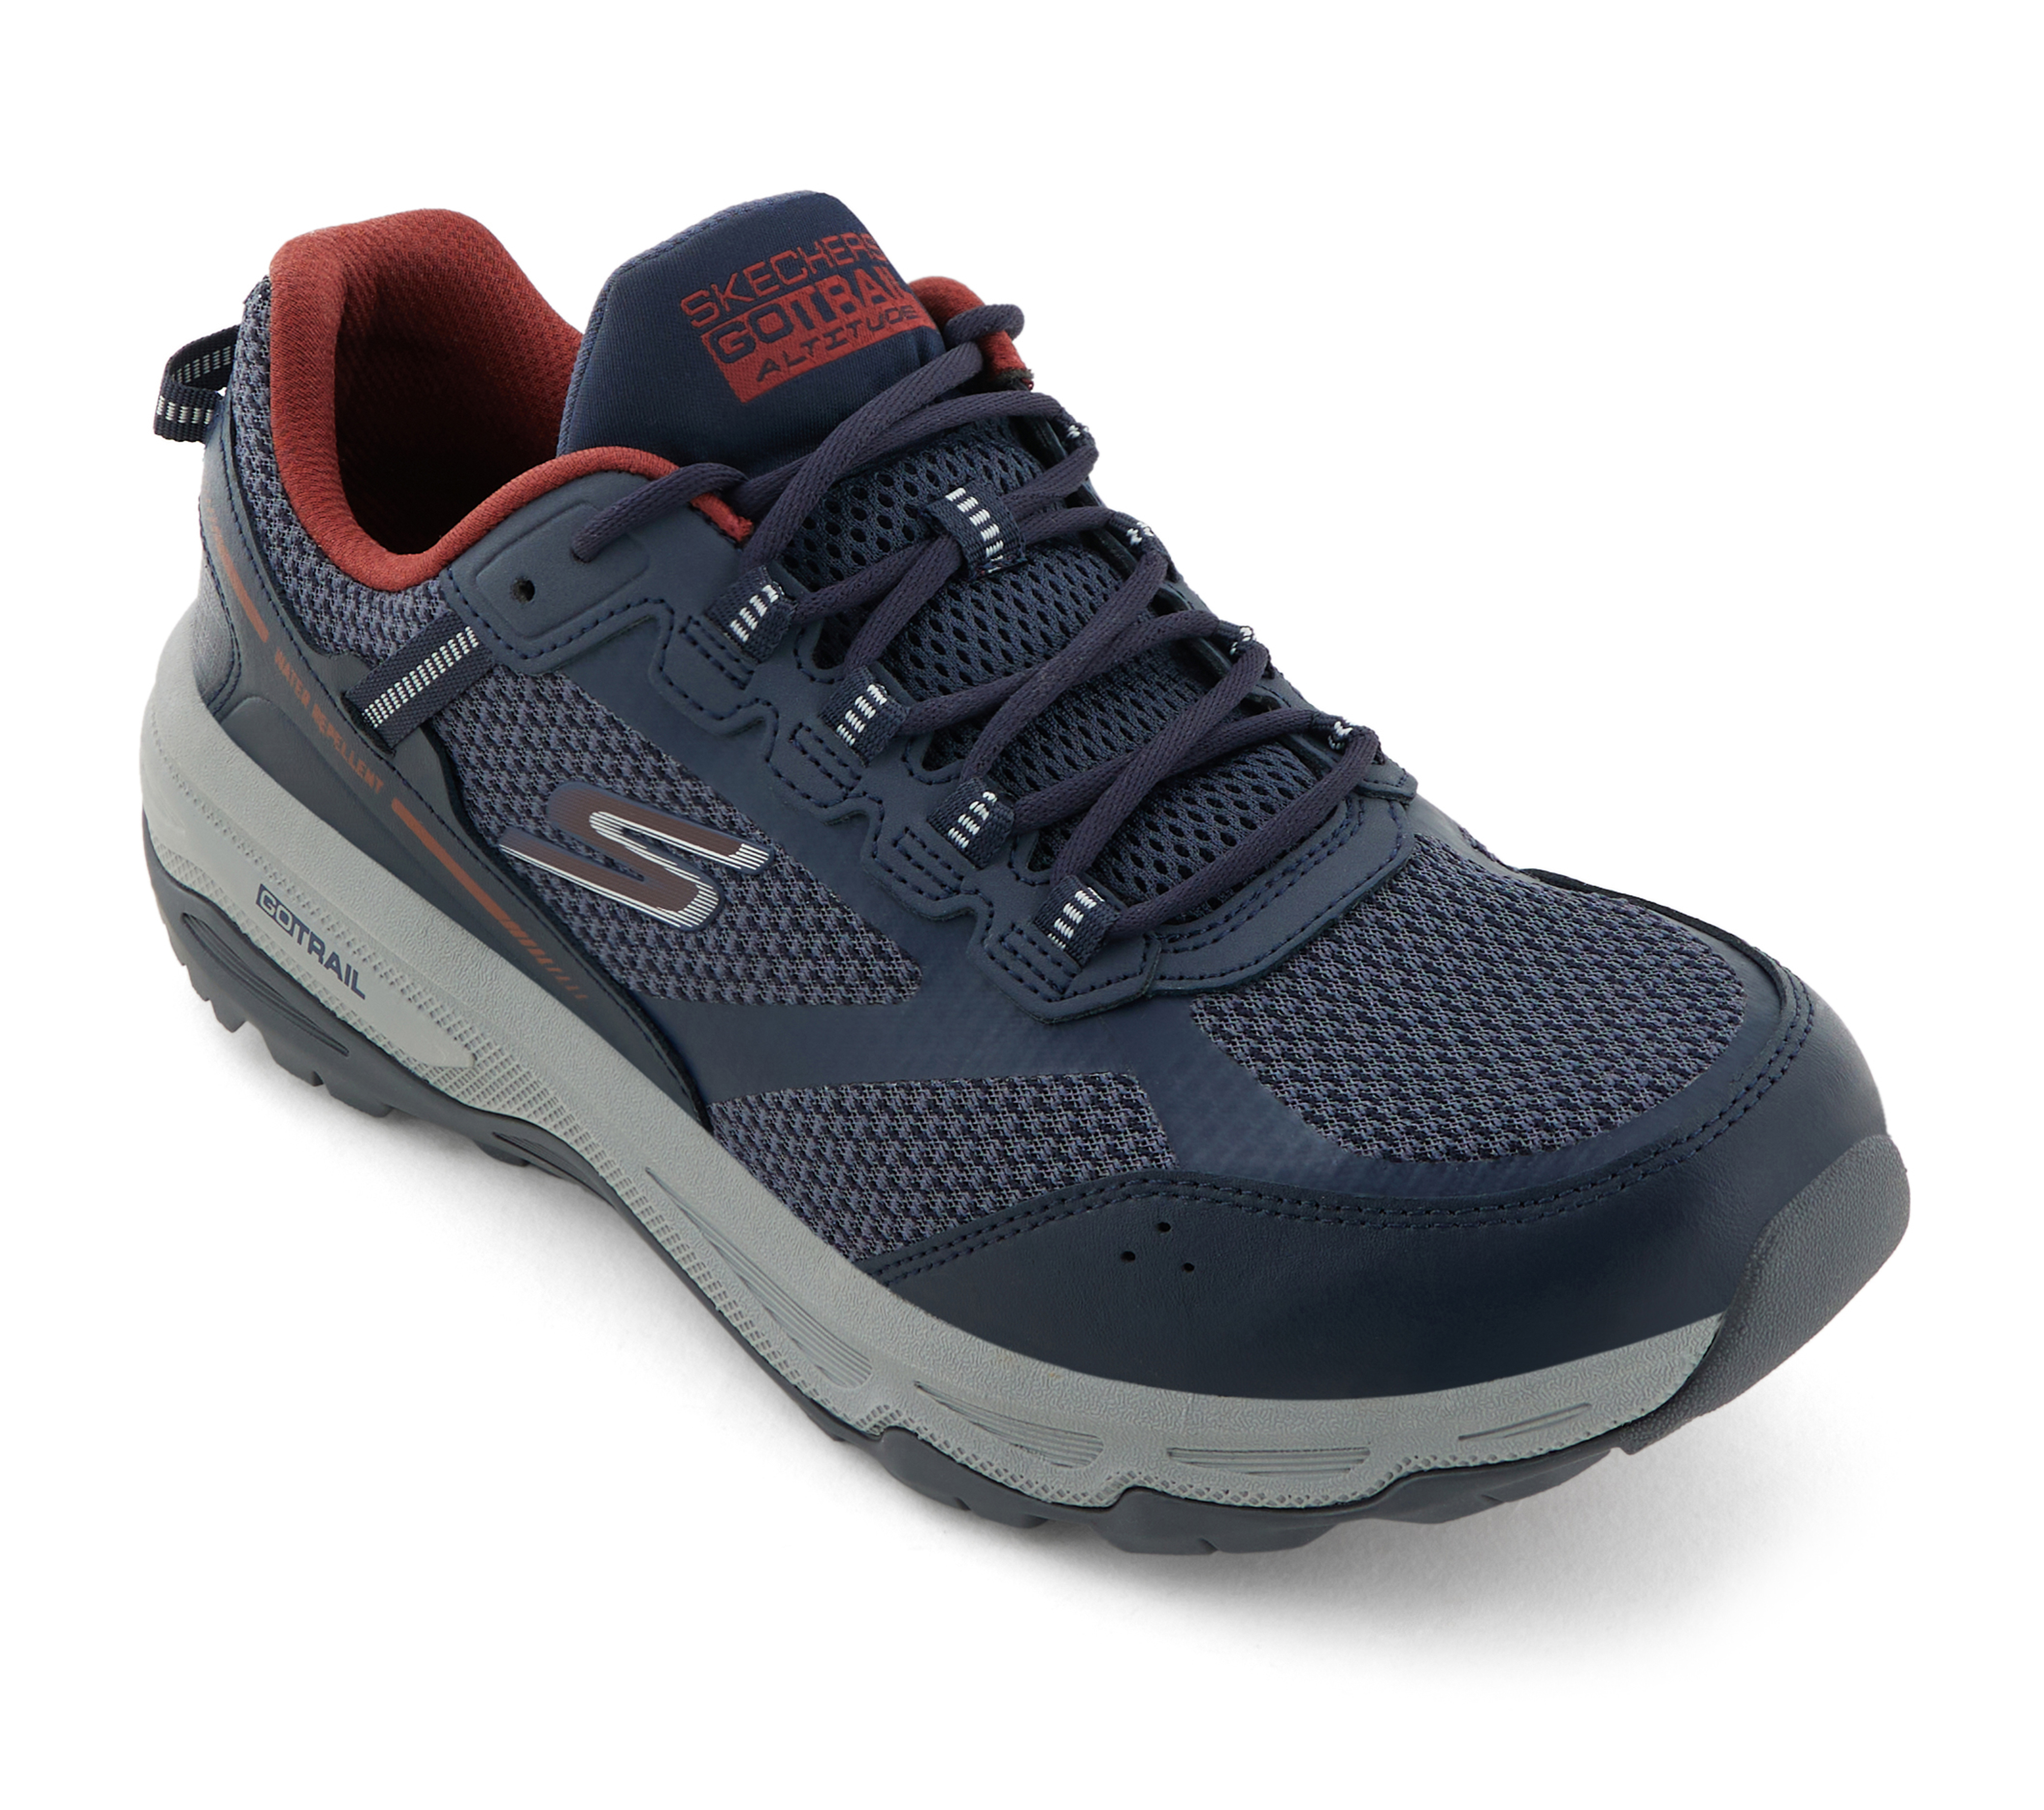 GO RUN TRAIL ALTITUDE, NAVY/GREY Footwear Lateral View